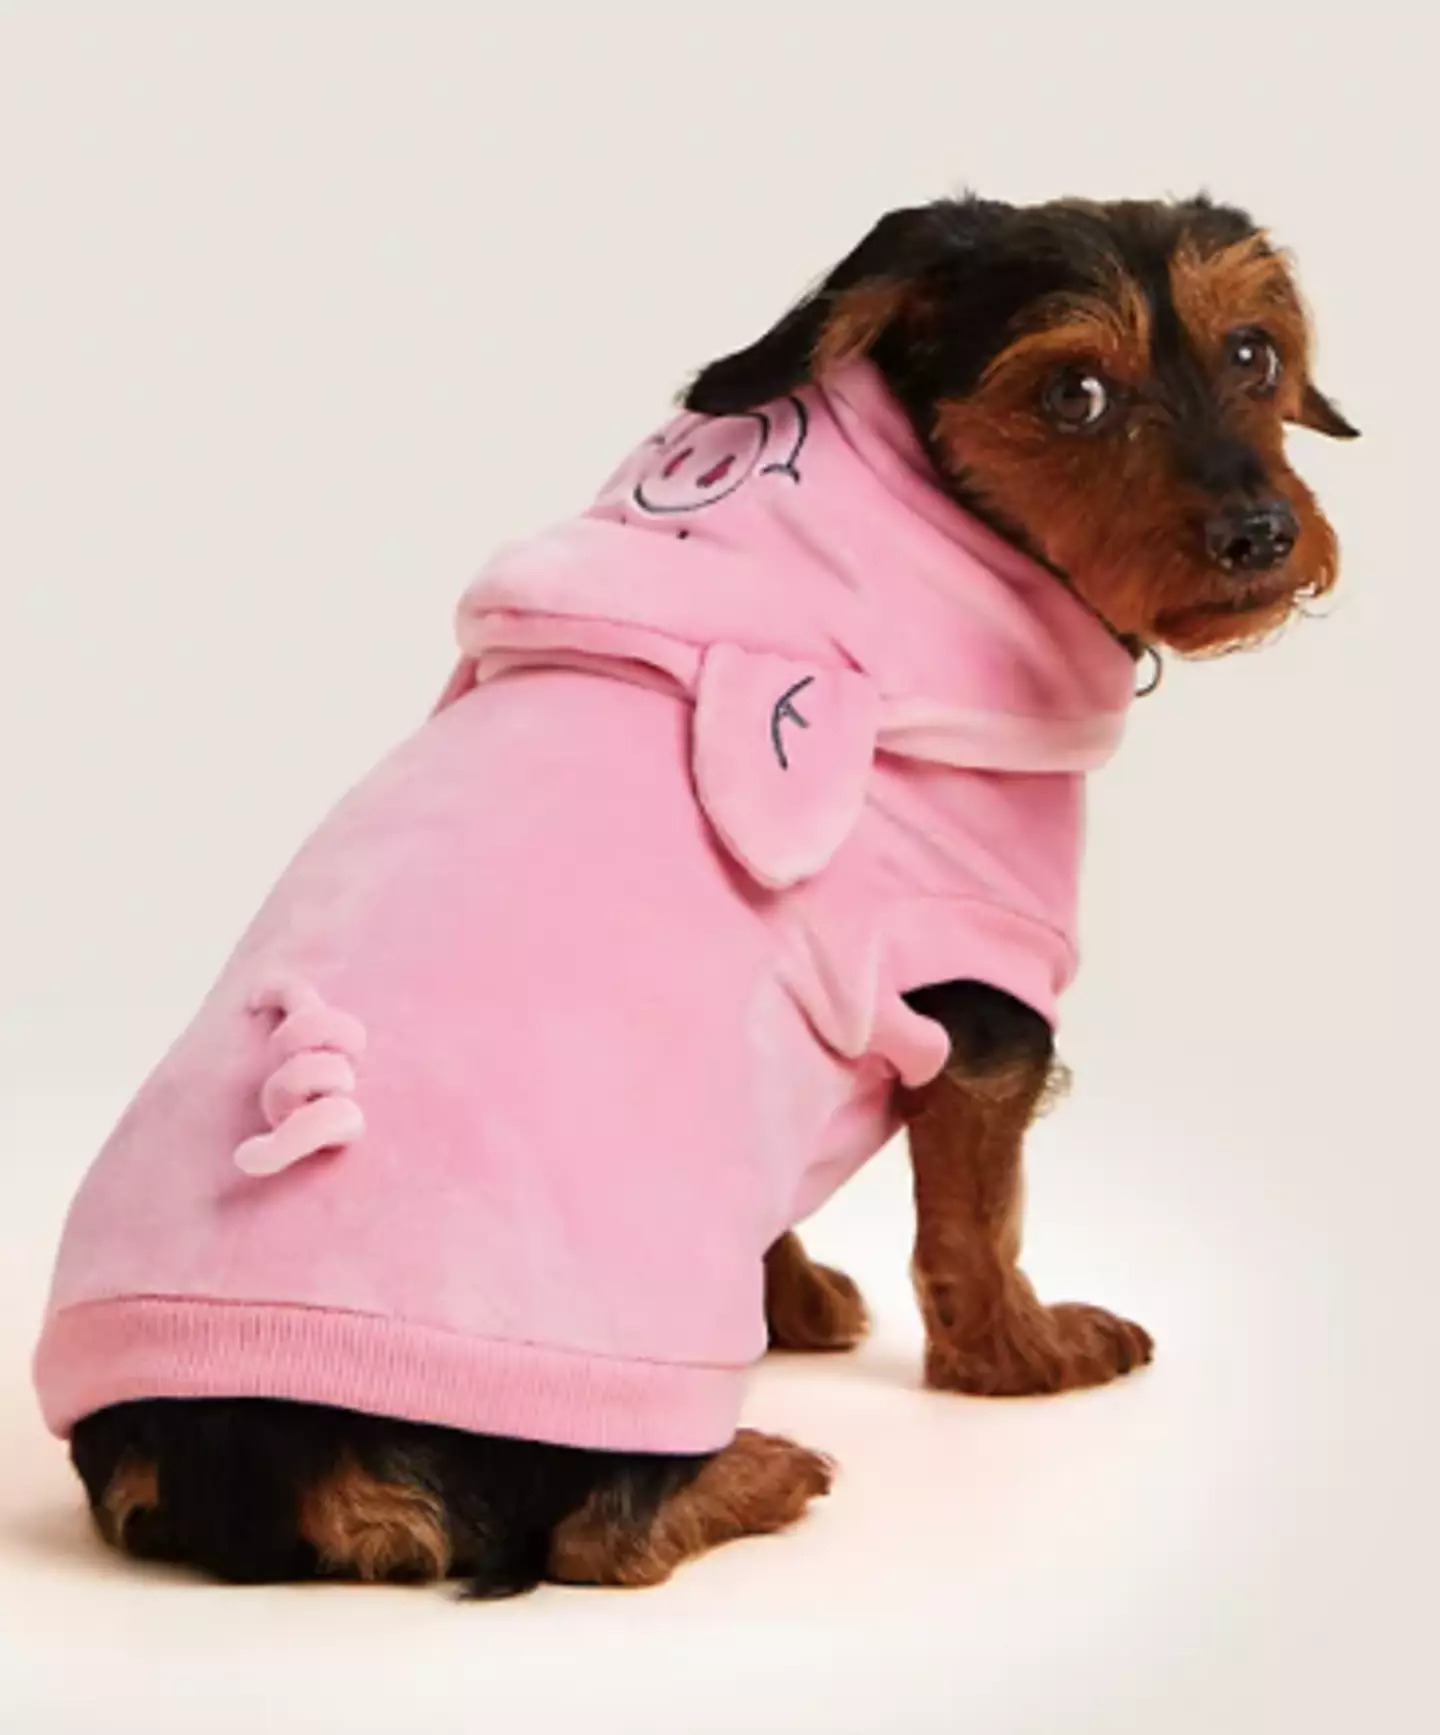 M&S is now selling a dog jumper (